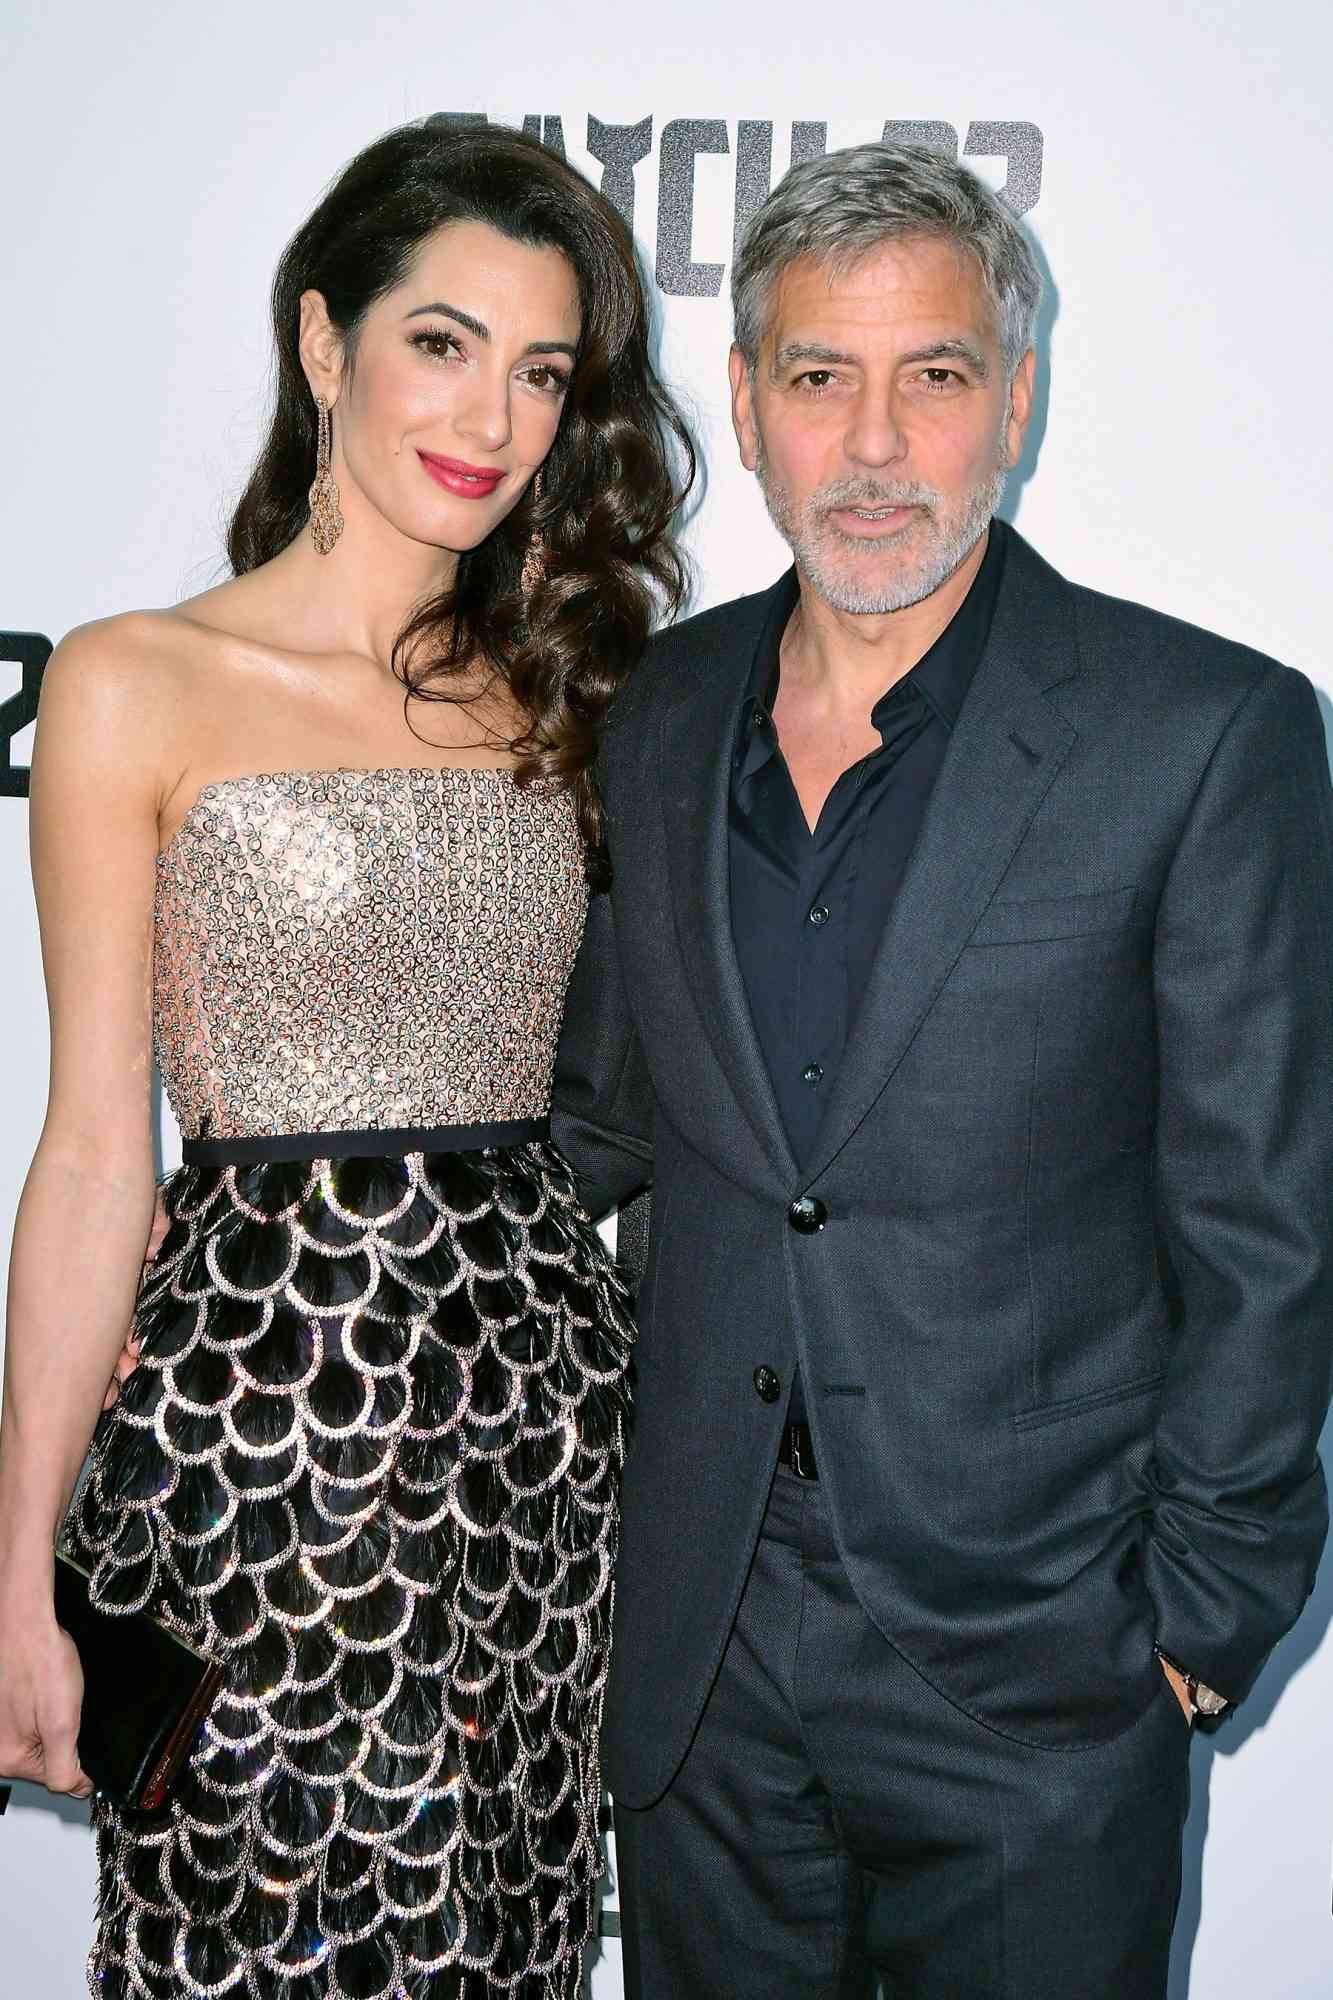 Amal Clooney (left) and George Clooney